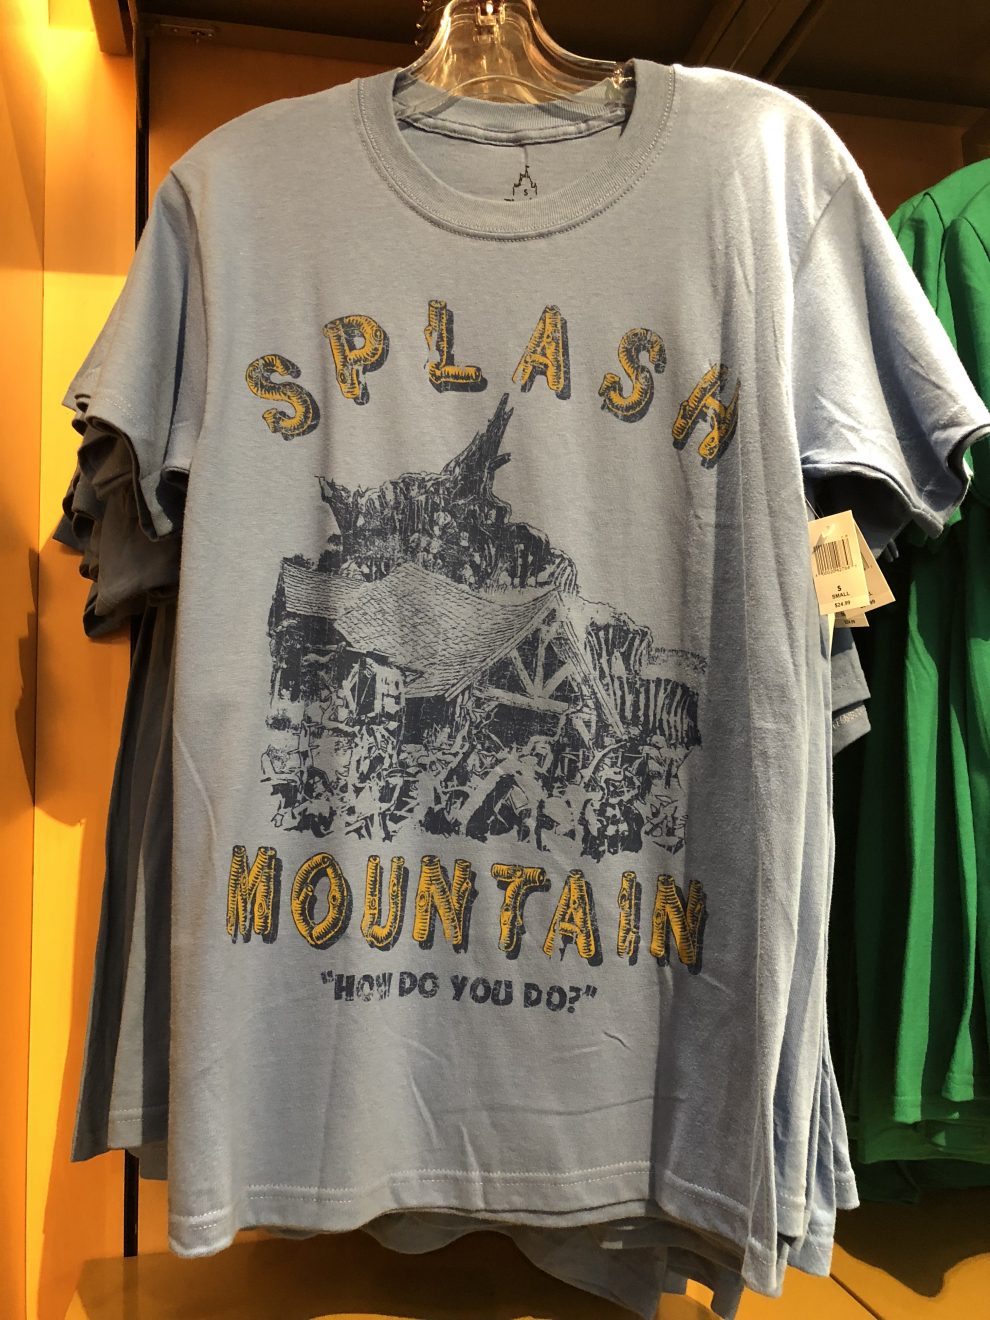 Park Attraction Tees with Vintage Style! - Fashion